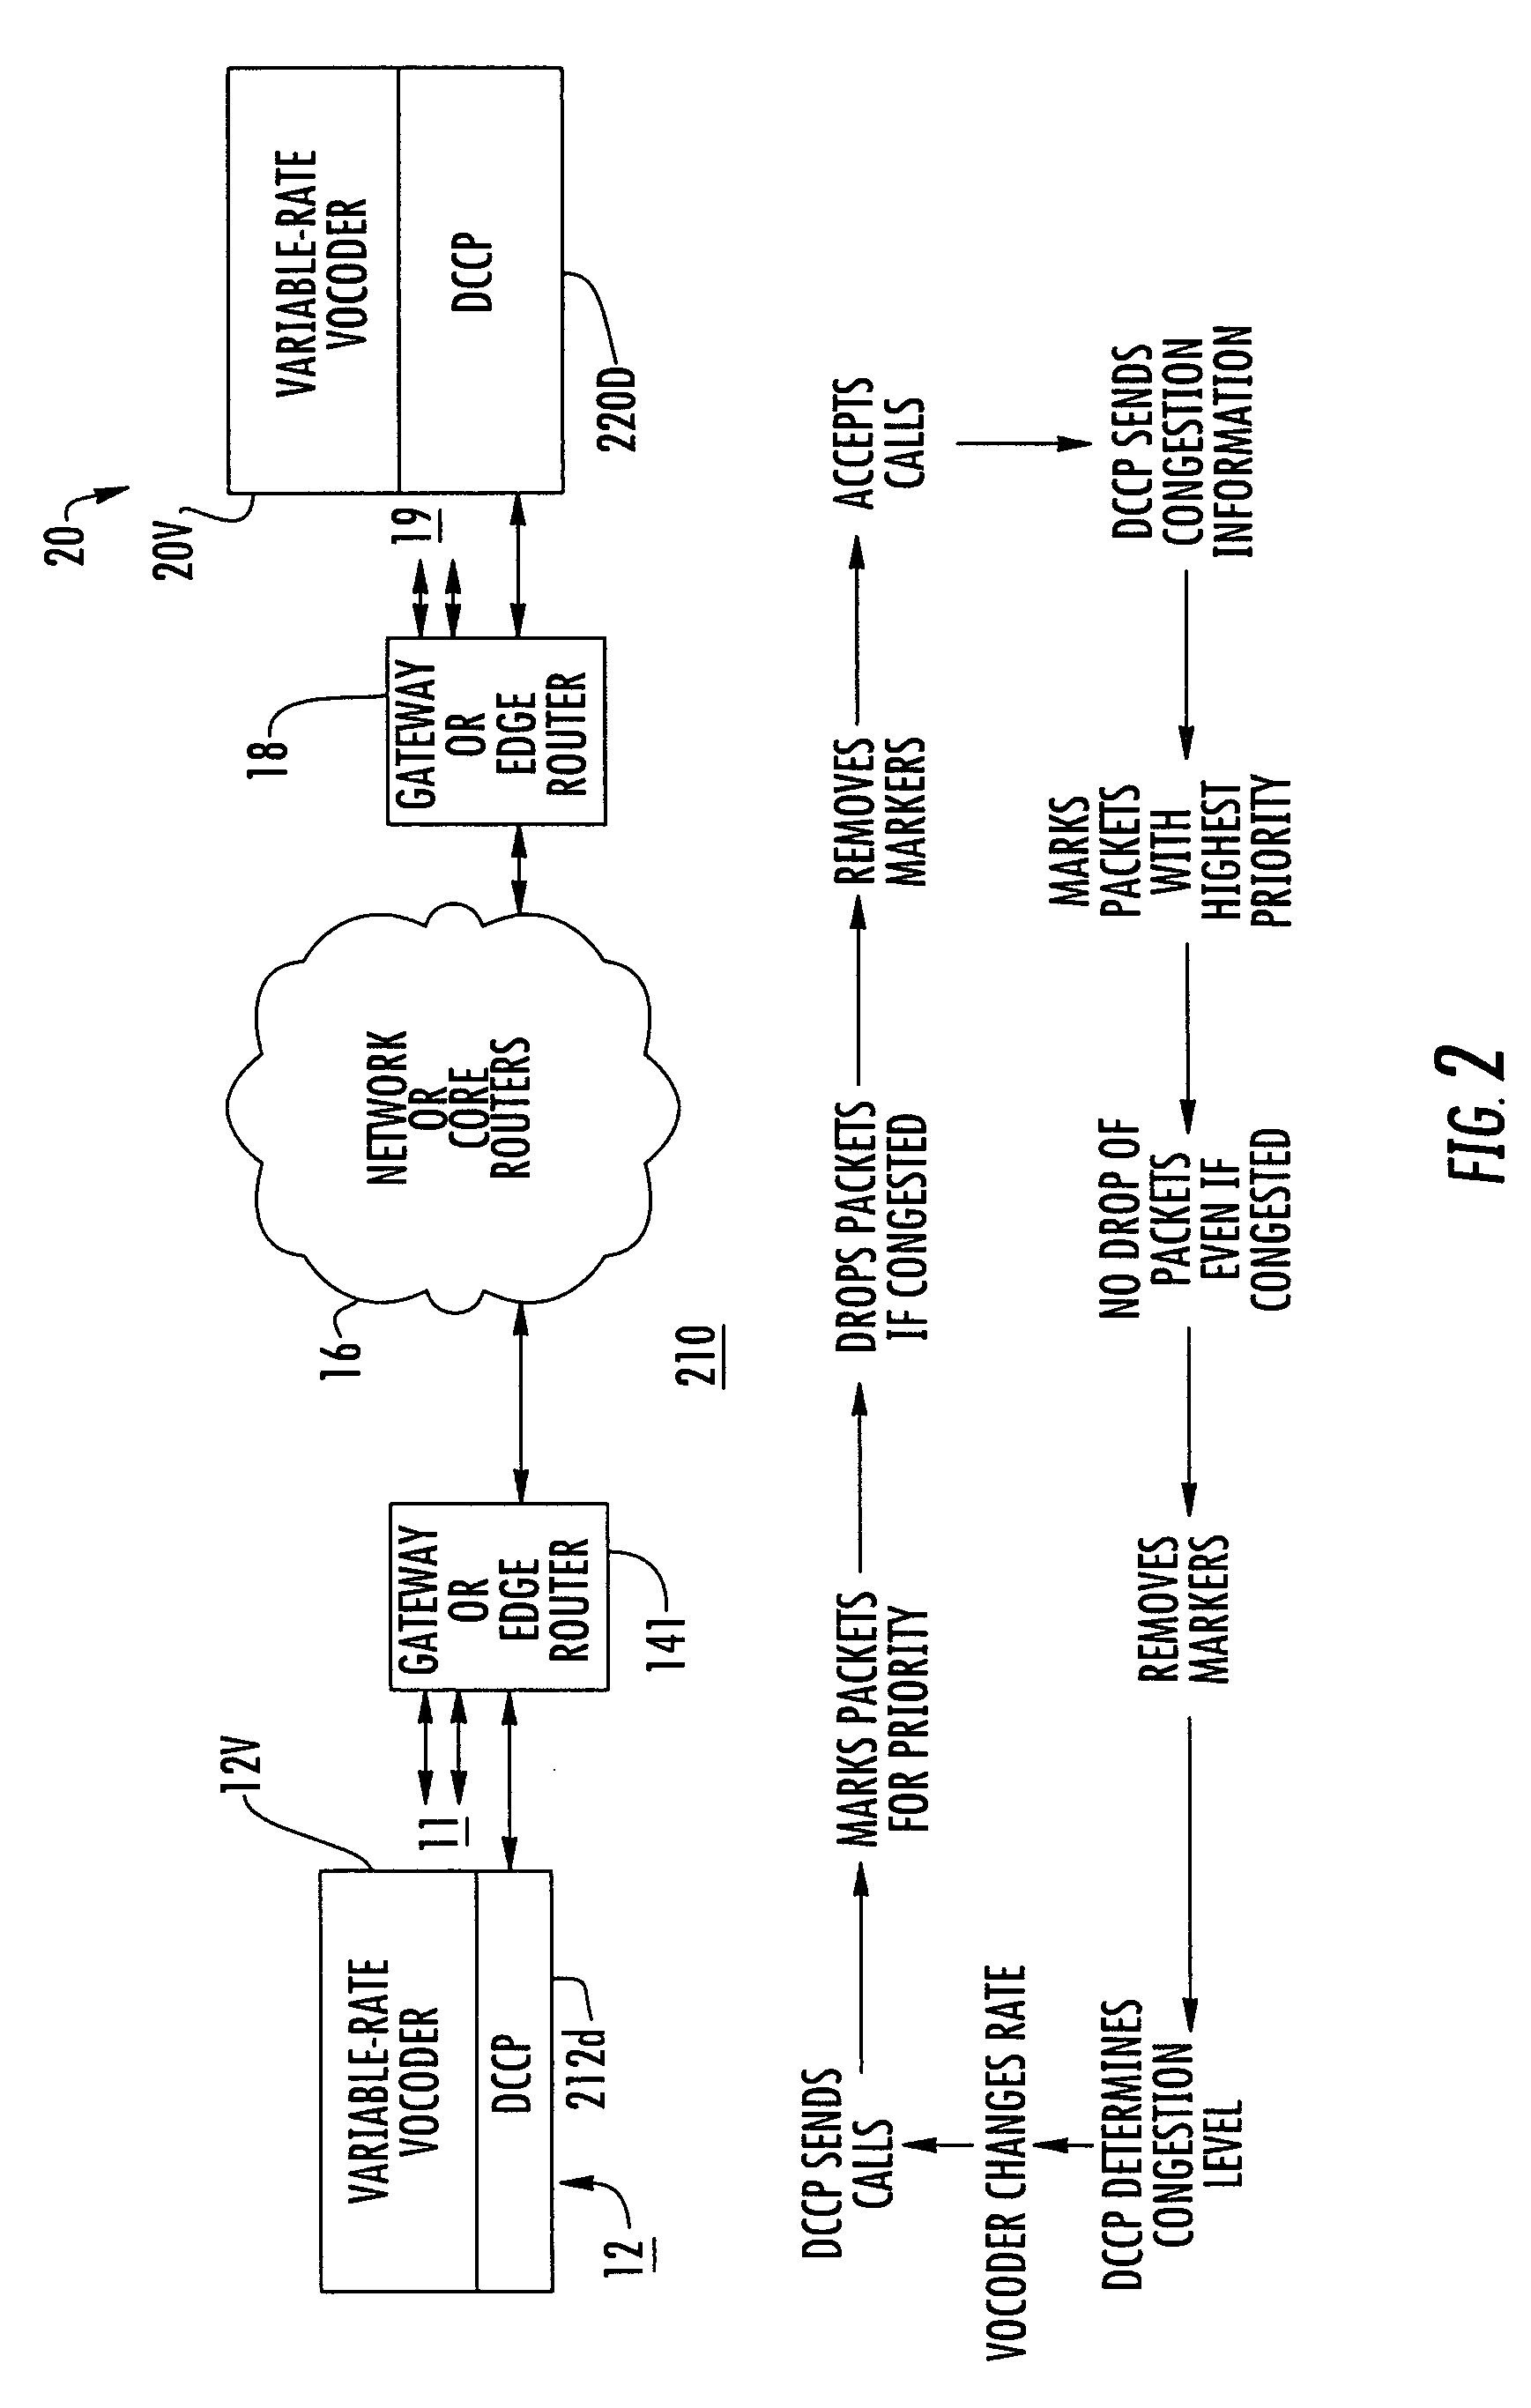 Adaptive application sensitive rate control system for packetized networks